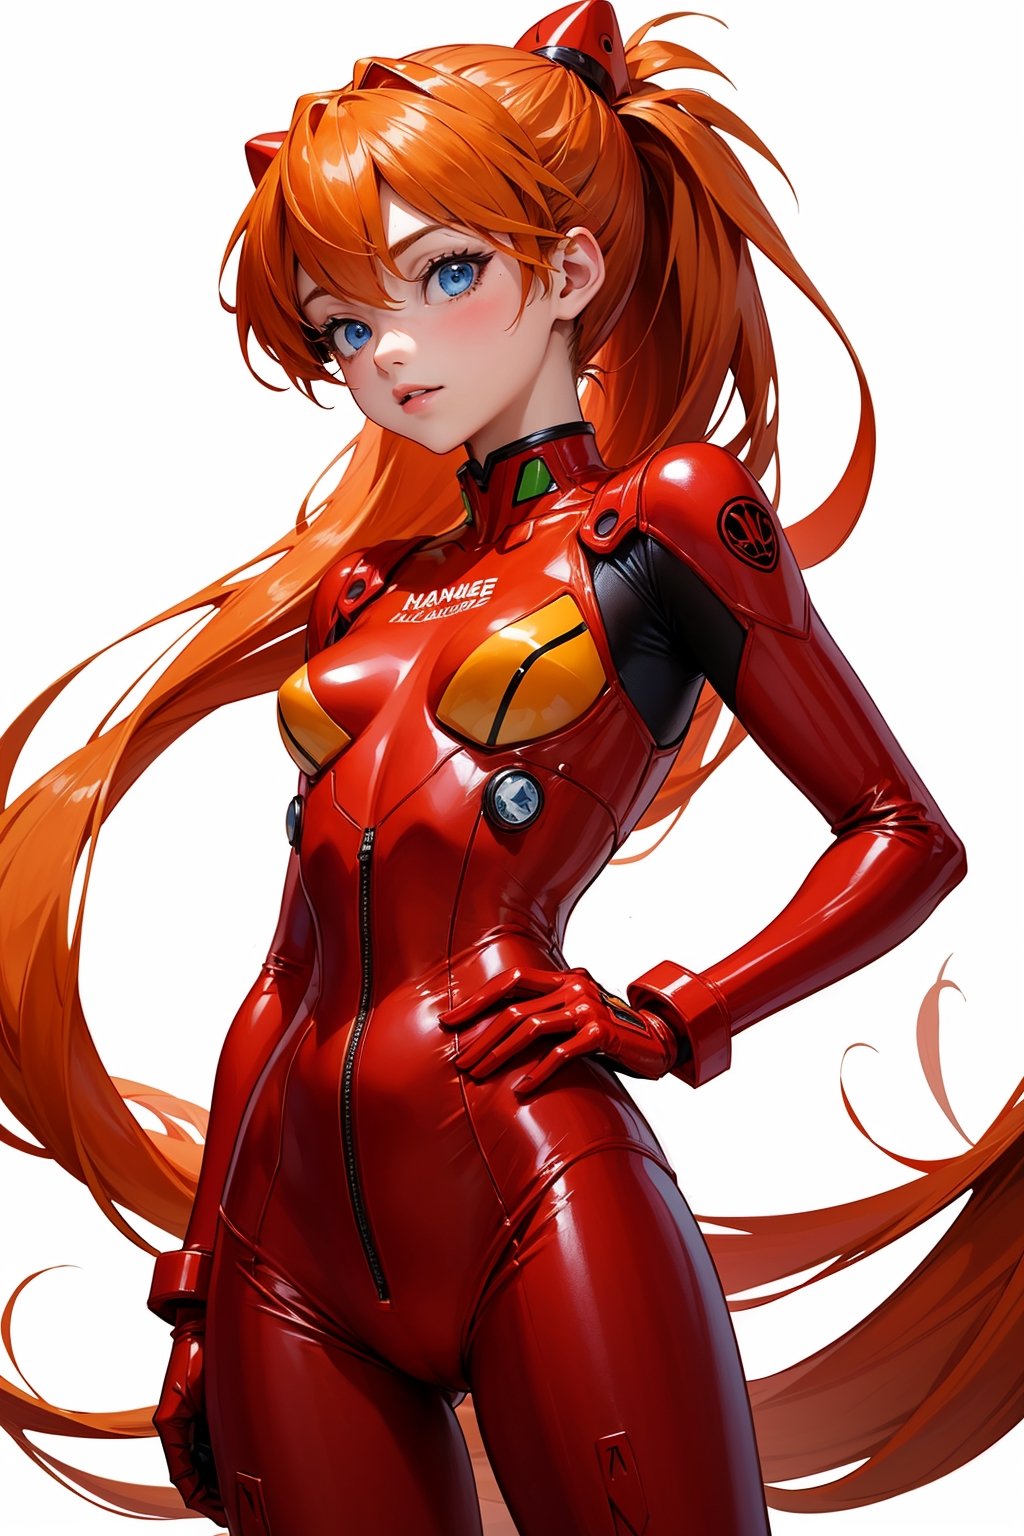 Prompt
Asuka Langley, teenage girl, 2 ponytail hair . Orange hair, with bangs, in a red suit, petite body , perfect body, pretty face, blue eyes, high quality image